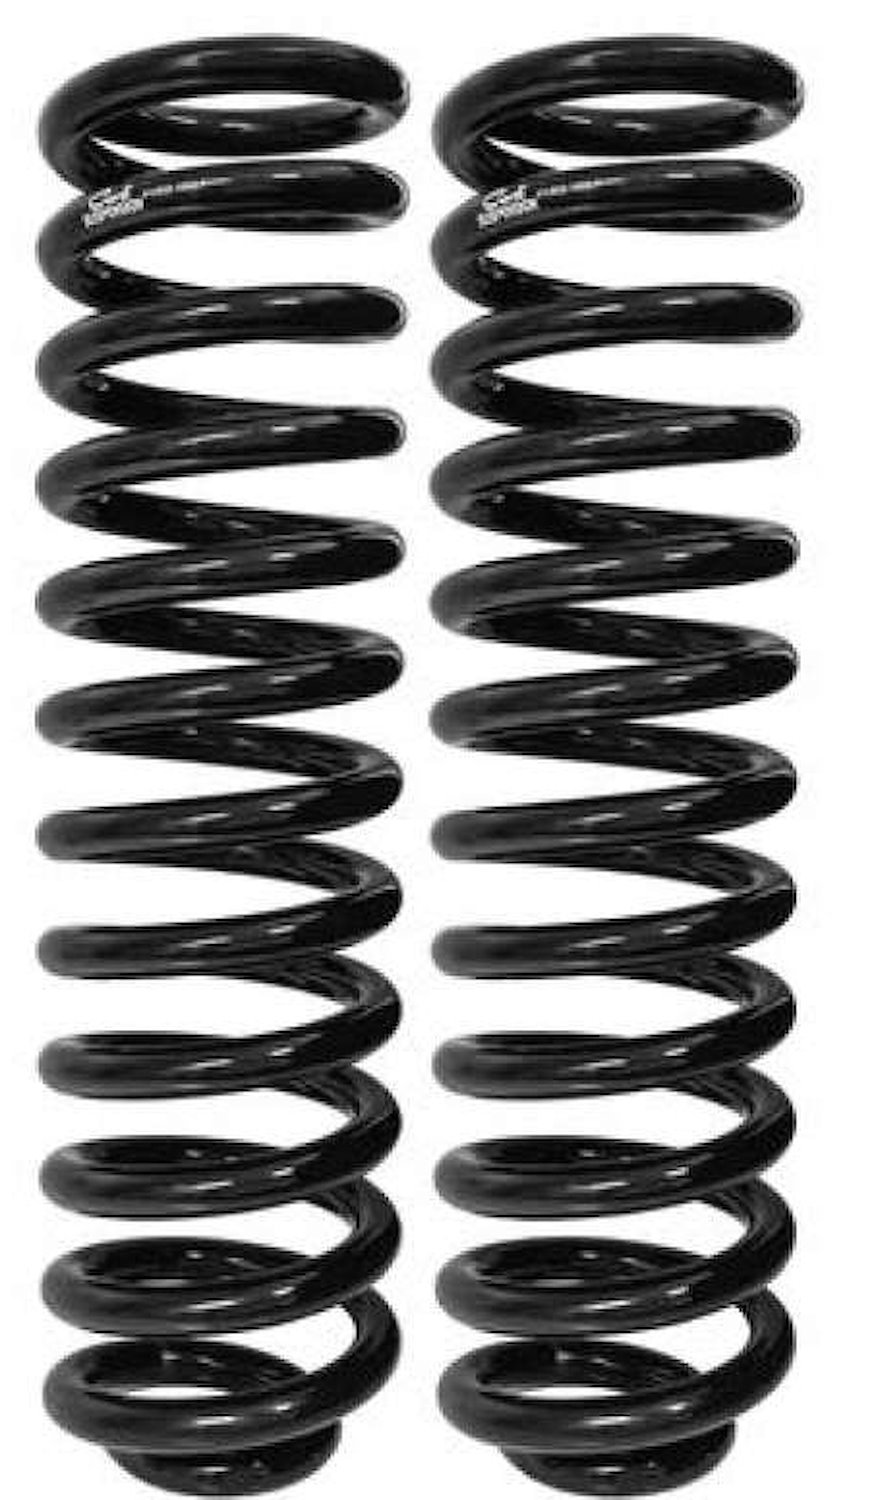 4.500 in. Progressive Coil Springs Fits Select Ford